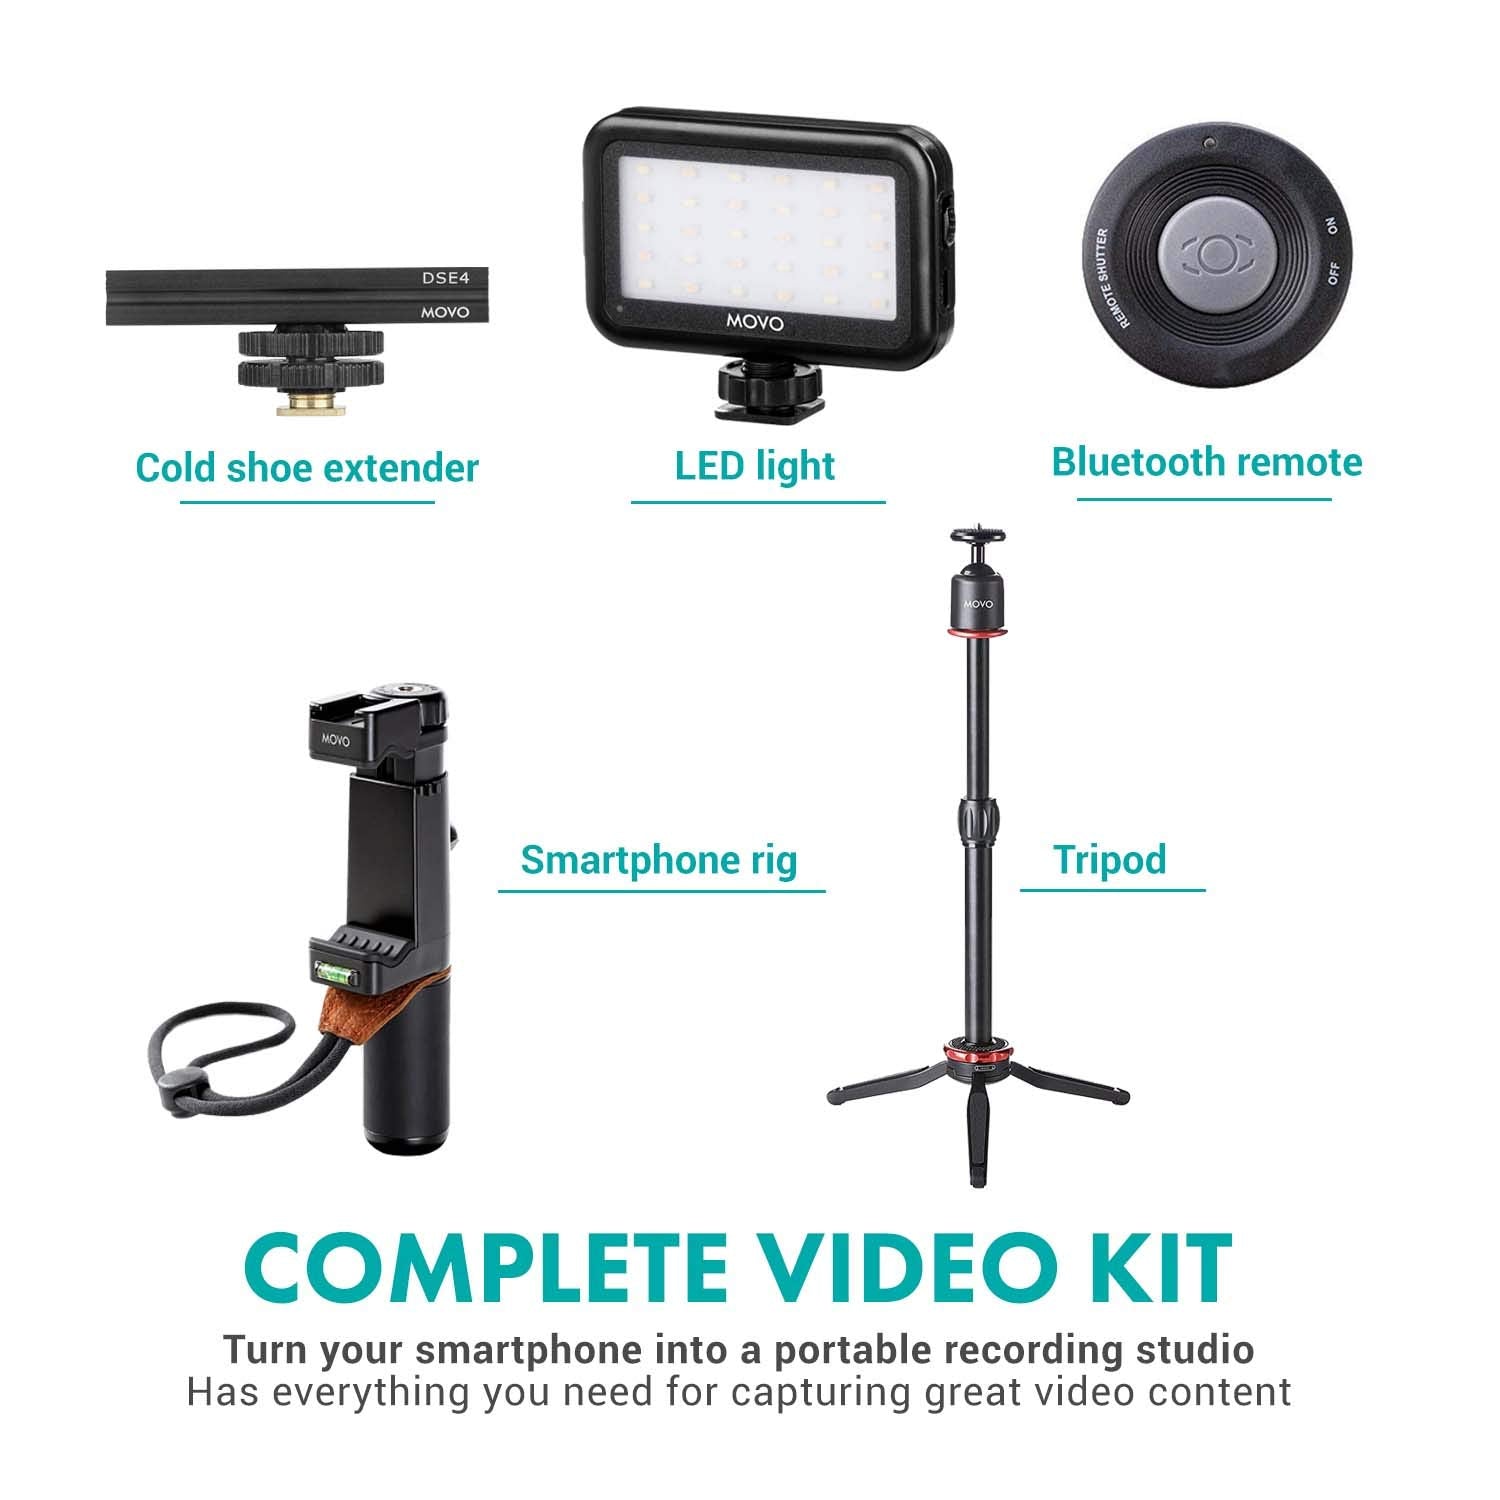 Movo V8 Huge Vlogging Kit for iPhone with Tripod, Grip, Microphones, LED Lights, and Wireless Remote Vlog Kit - YouTube Starter Kit for iPhone or Samsung - iPhone Vlogging Kit Equipment  - Very Good